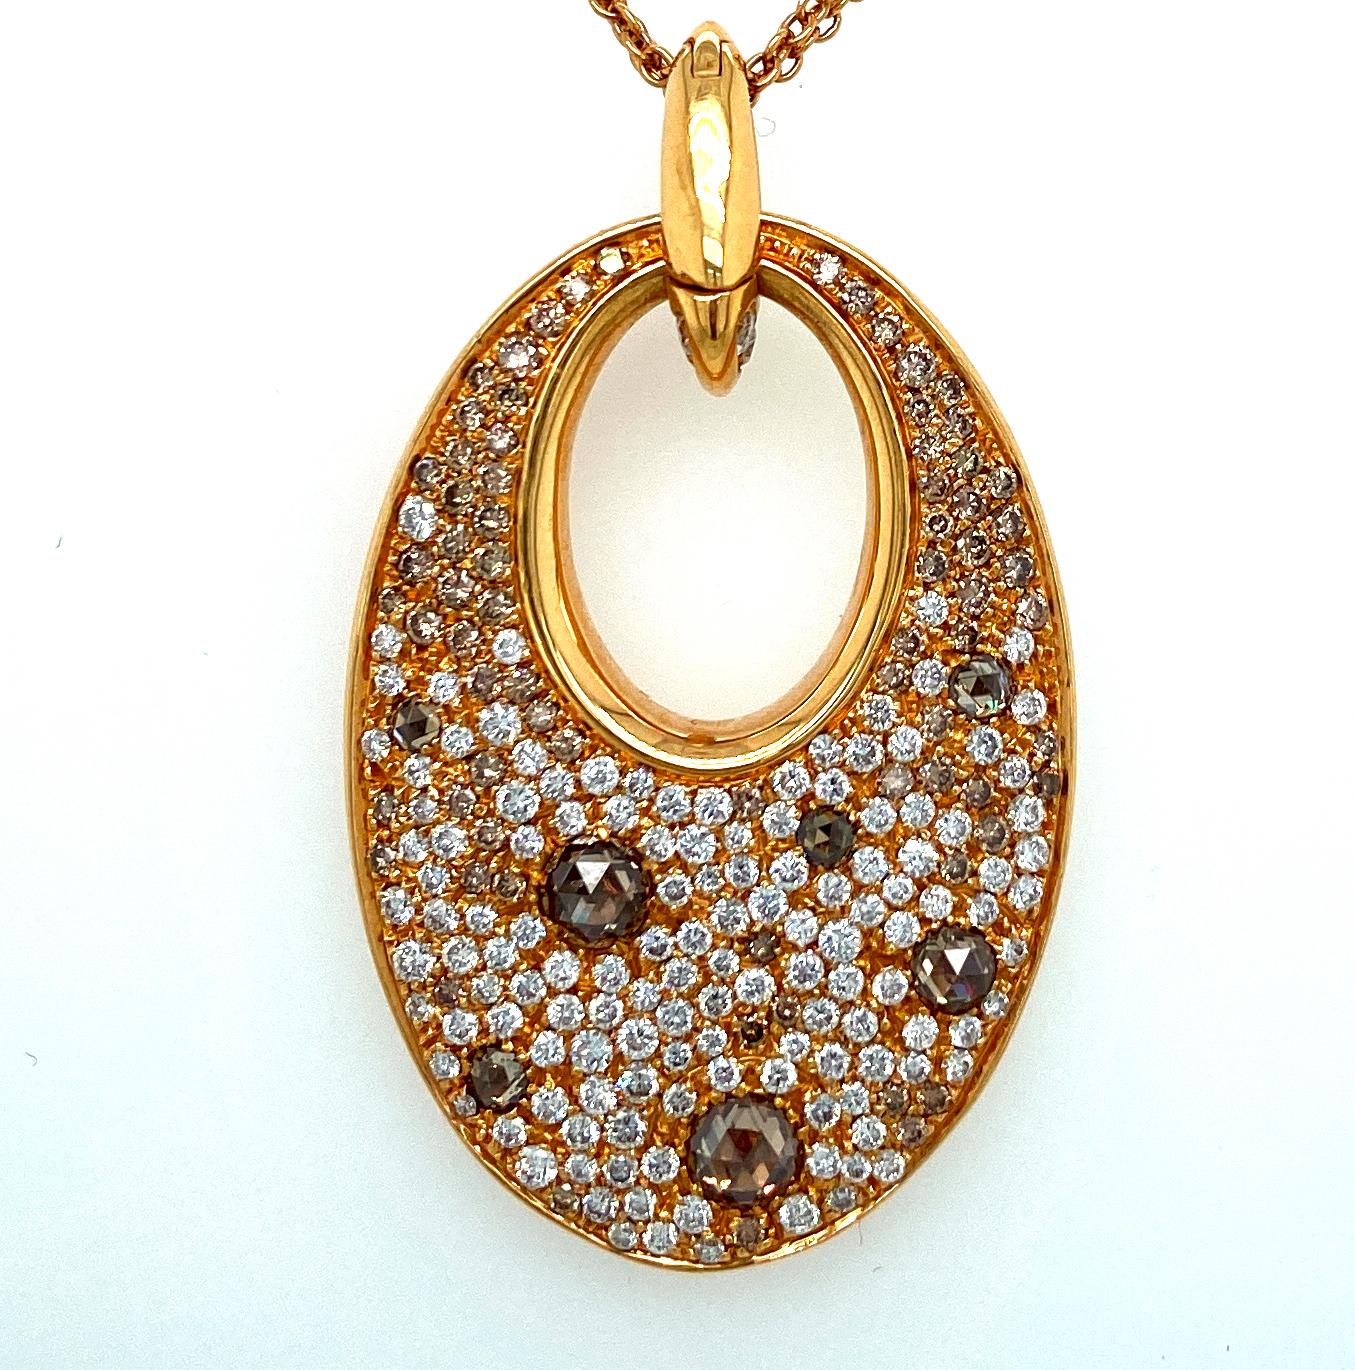 Exquisite 18Kt Pink Gold Necklace, Pendant Set With White, Cognac Diamonds 3.29 Carat

Can be purchased with gorgeous matching earrings, Check out item number LU1752217137032

Diamonds: white and cognac diamonds (together ca. 3.29ct)

Material: 18kt